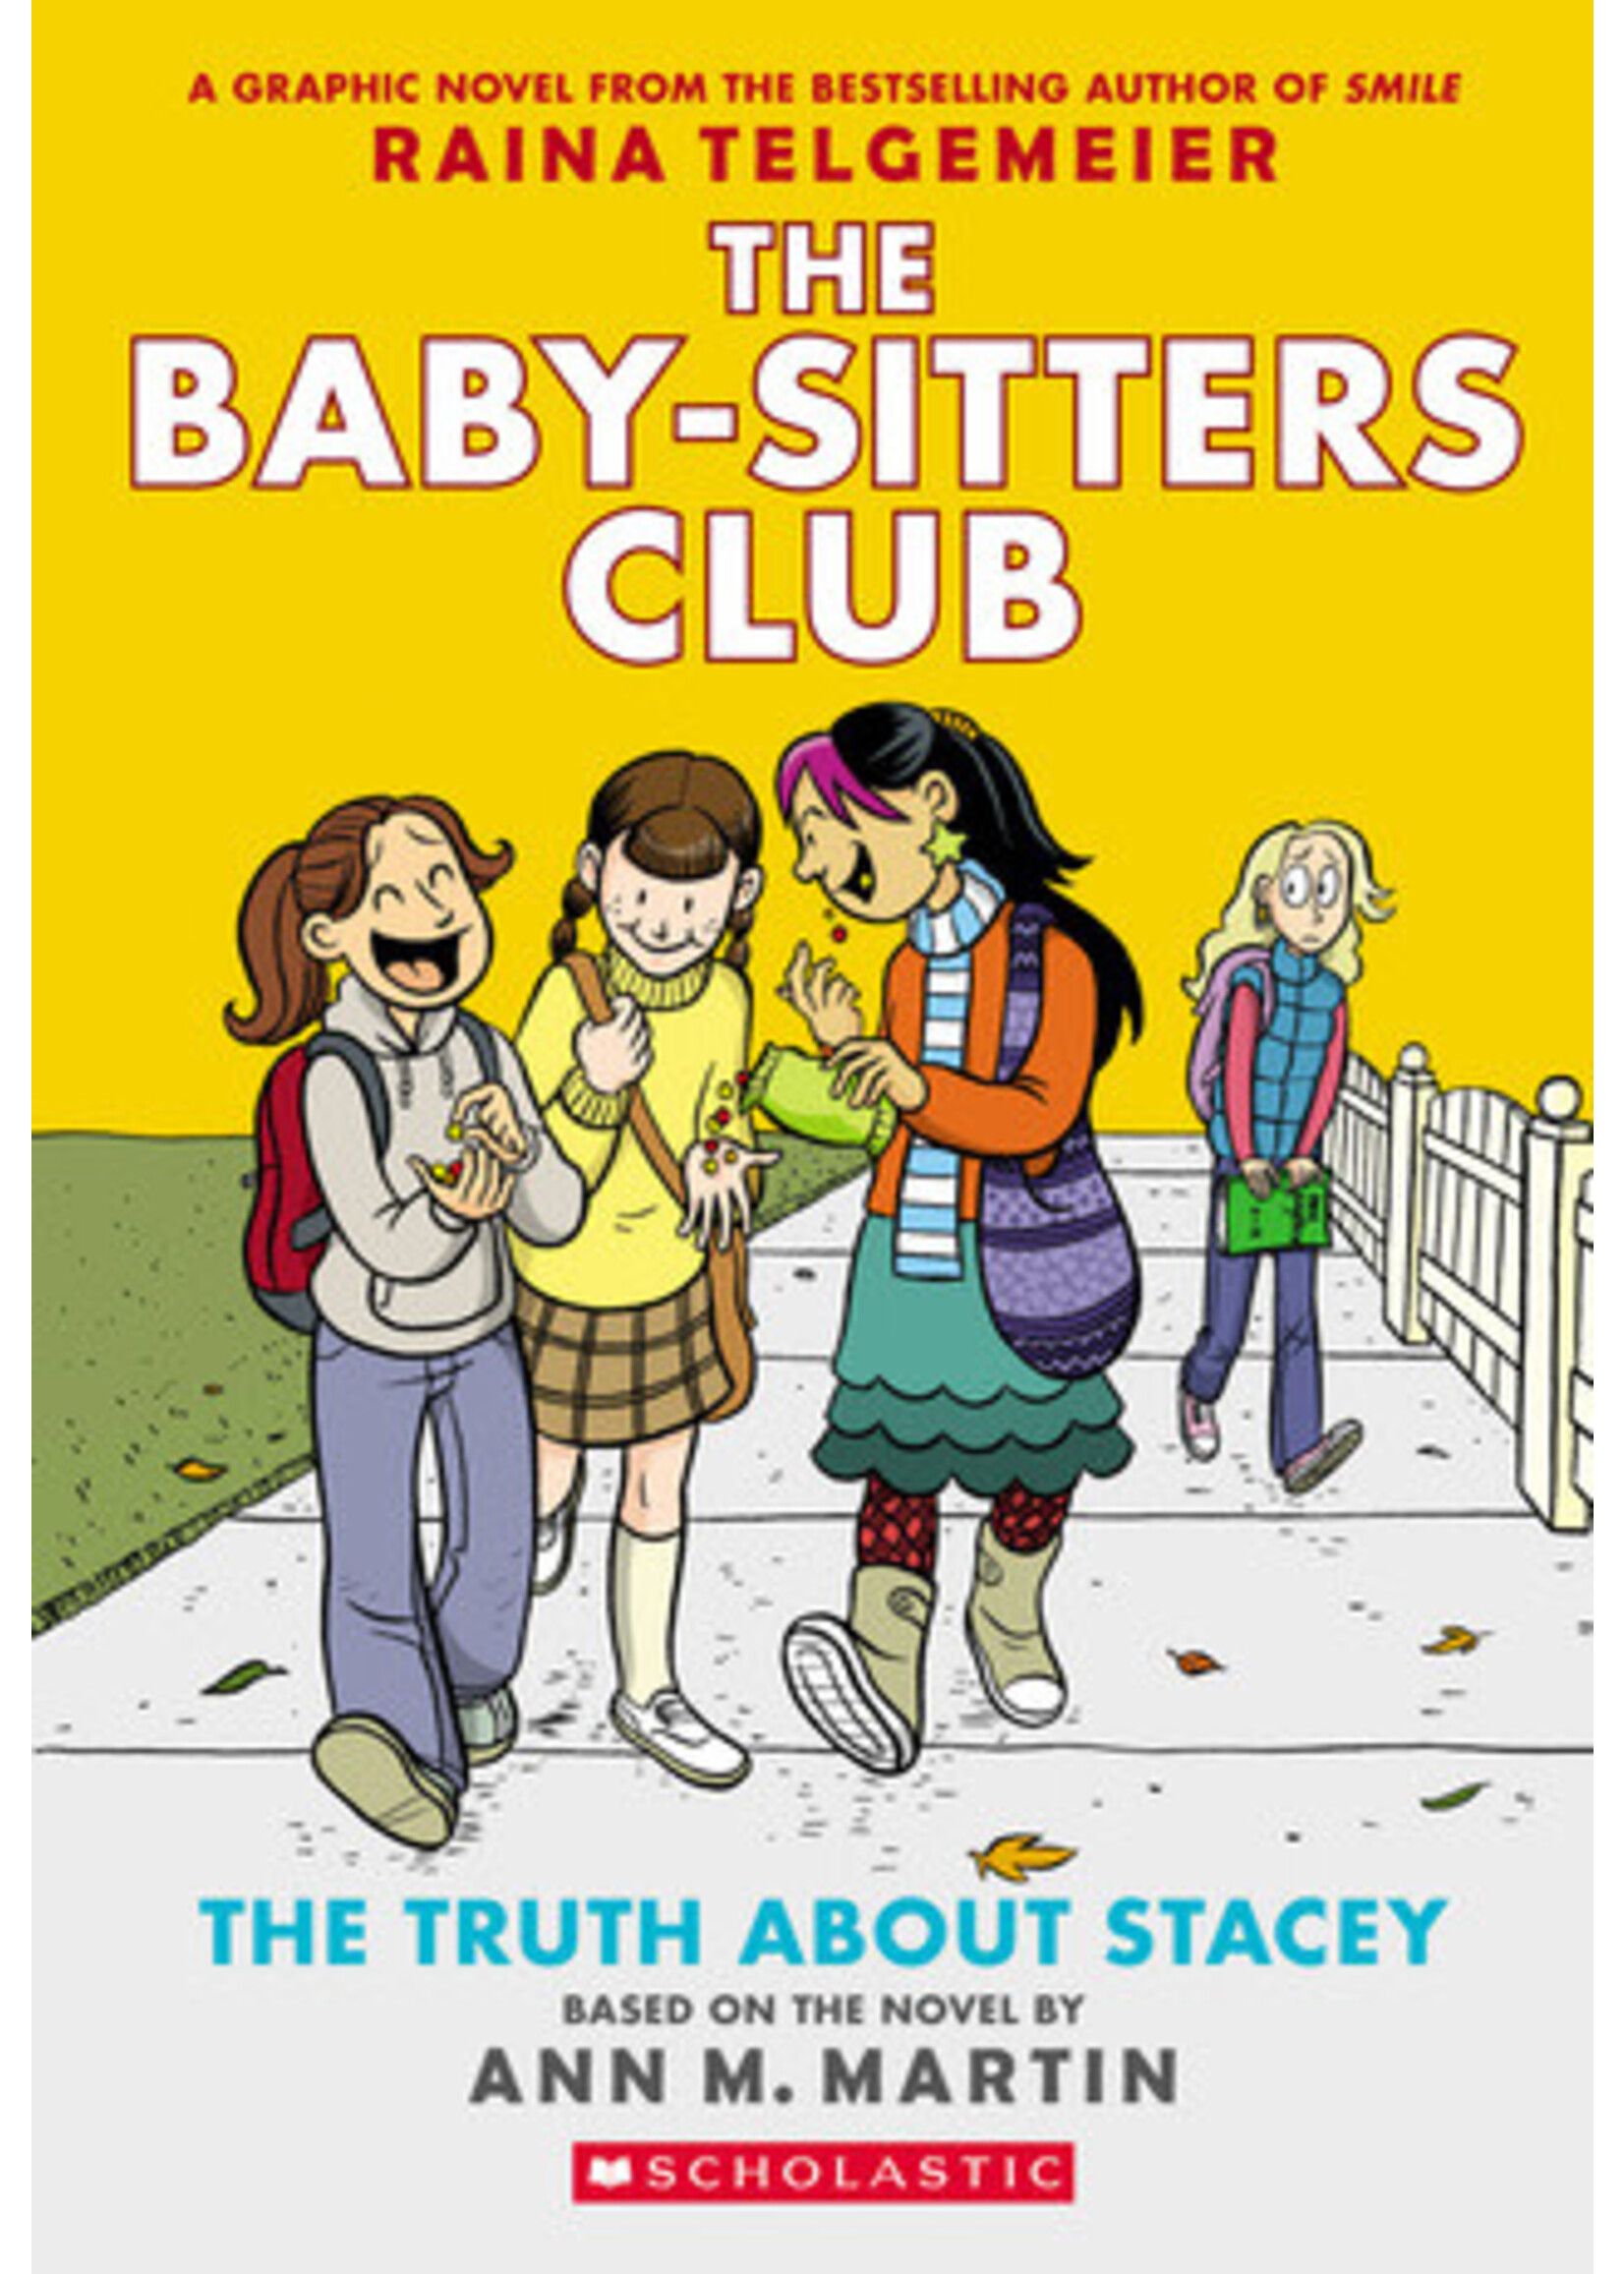 The Truth About Stacey (Baby-Sitters Club Graphic Novels #2) by Raina Telgemeier